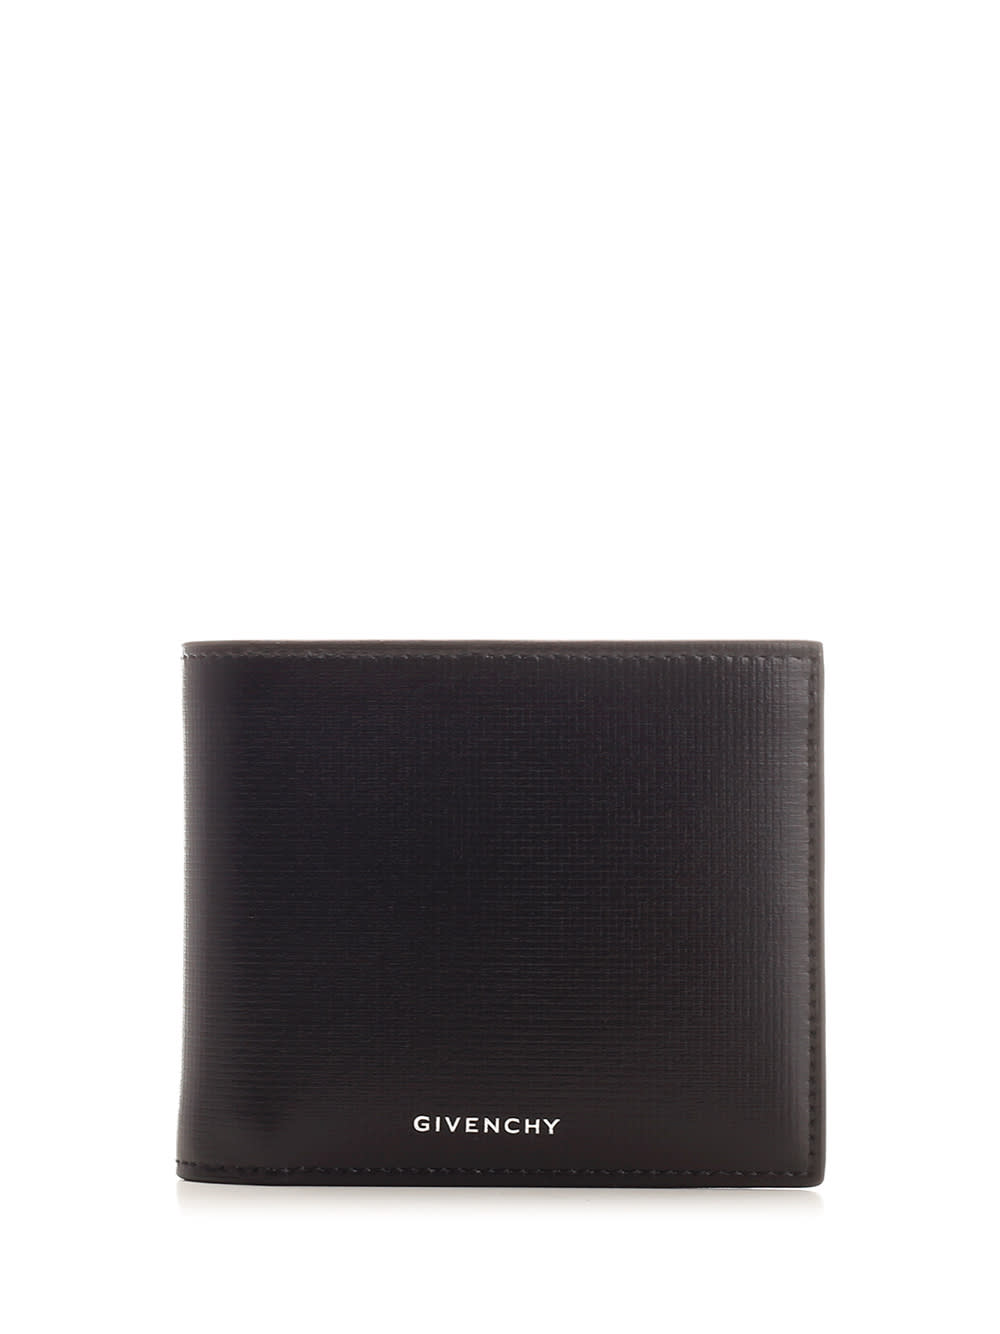 GIVENCHY BIFOLD WALLET IN BLACK LEATHER